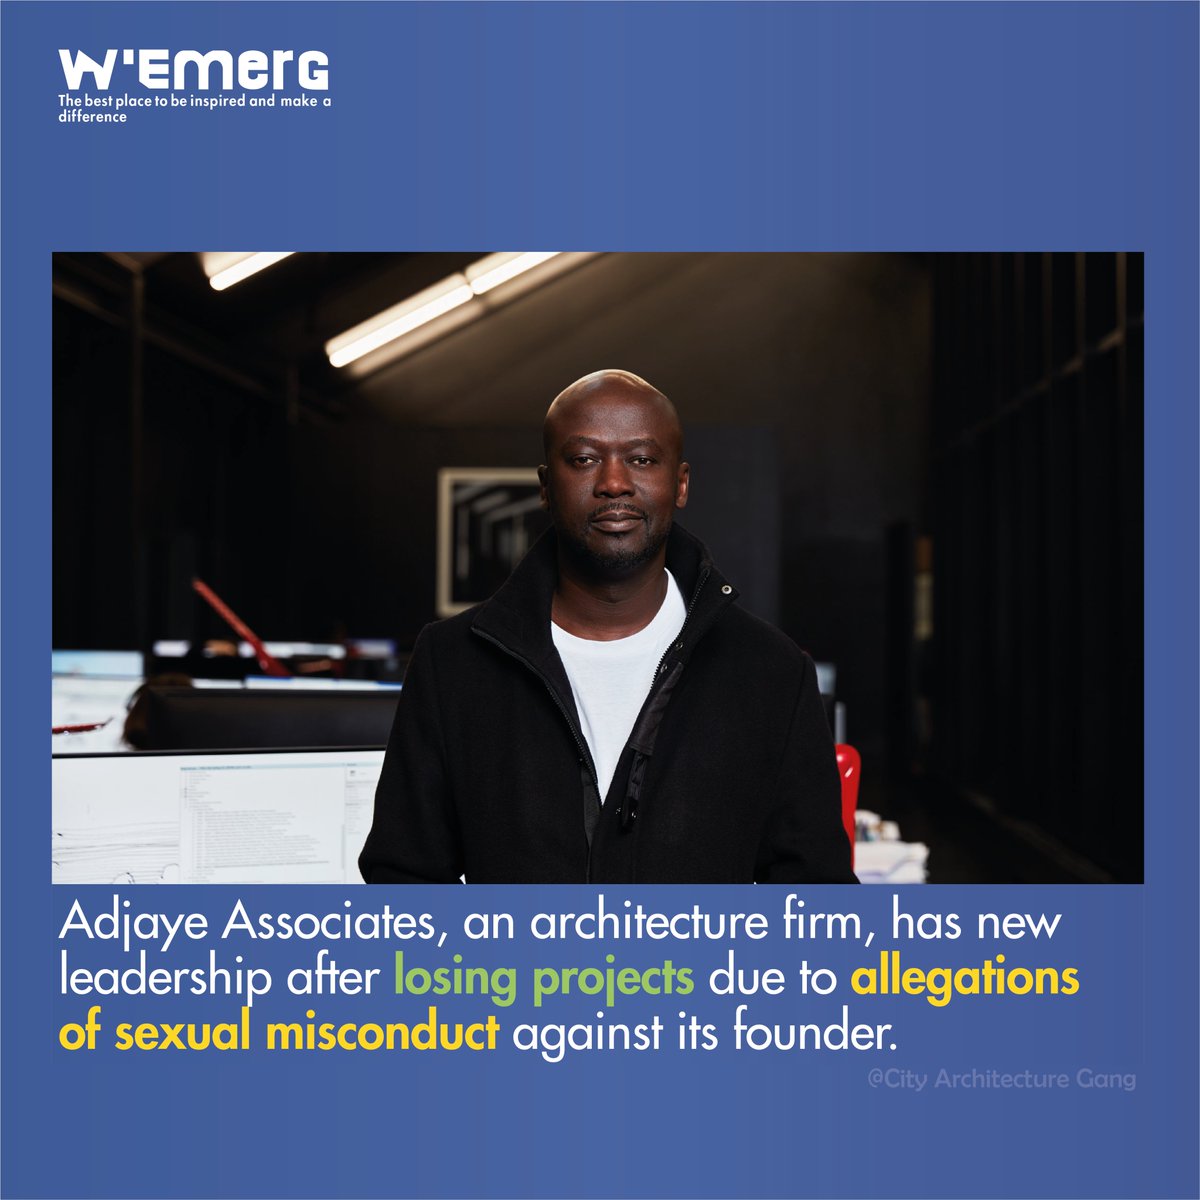 Adjaye Associates architecture studio has announced a new leadership following project losses due to allegations of sexual misconduct against its founder, David Adjaye. 
#AdjayeAssociates #NewLeadership #Allegations #SexualMisconduct #DavidAdjaye #NewCEOs #Accra #London